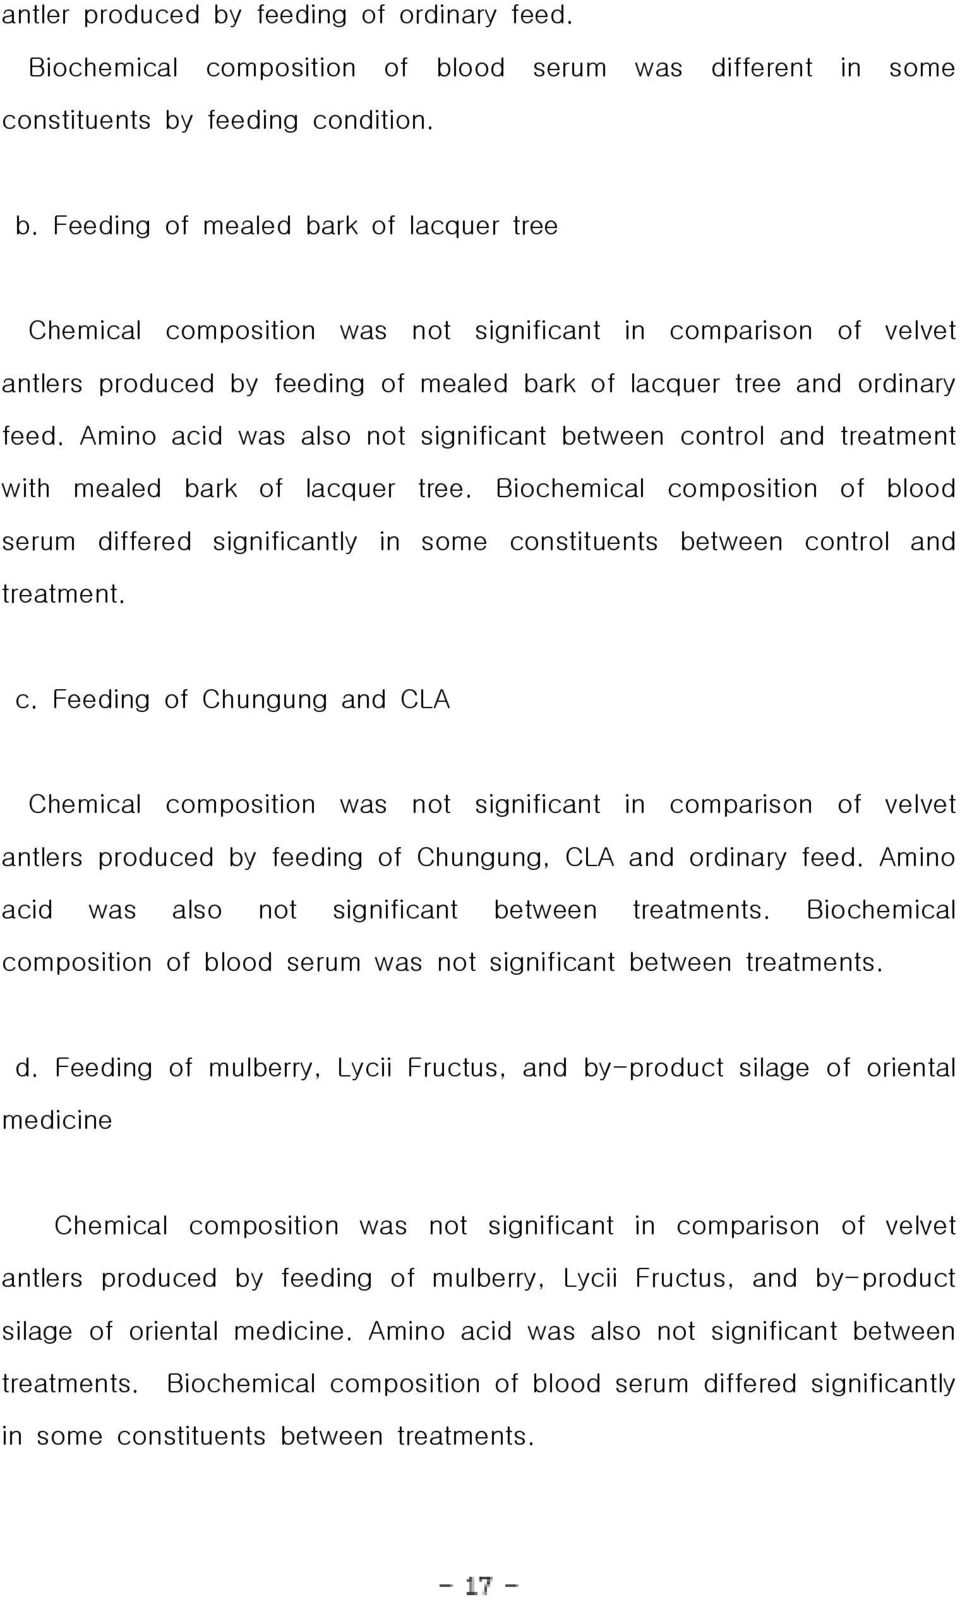 Biochemical composition of blood serum differed significantly in some constituents between control and treatment. c. Feeding of Chungung and CLA Chemical composition was not significant in comparison of velvet antlers produced by feeding of Chungung, CLA and ordinary feed.